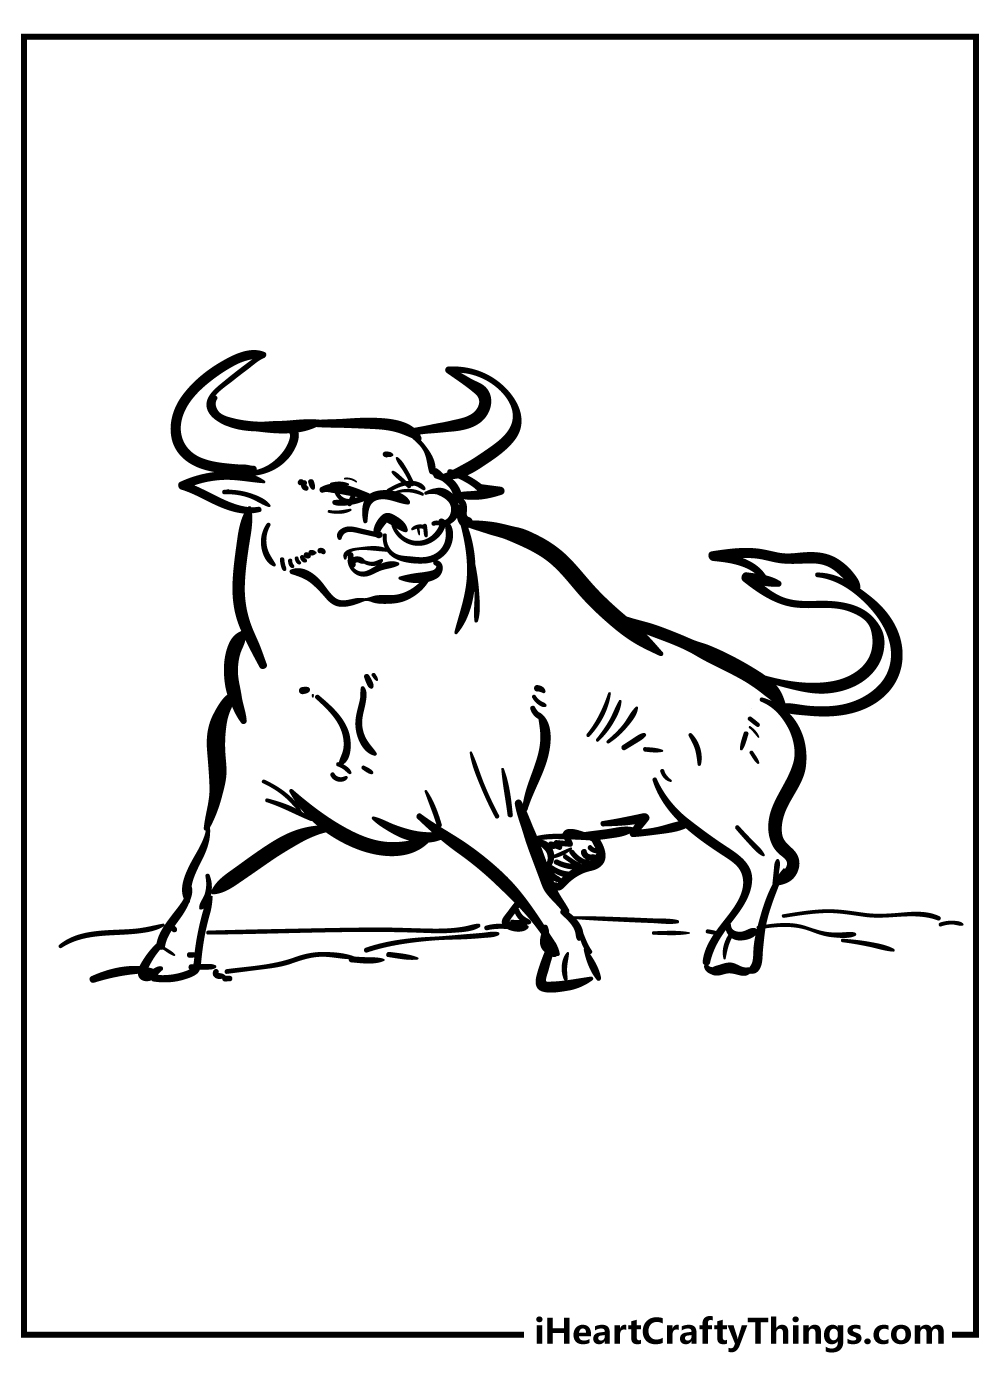 Bull Coloring Pages for preschoolers free printable